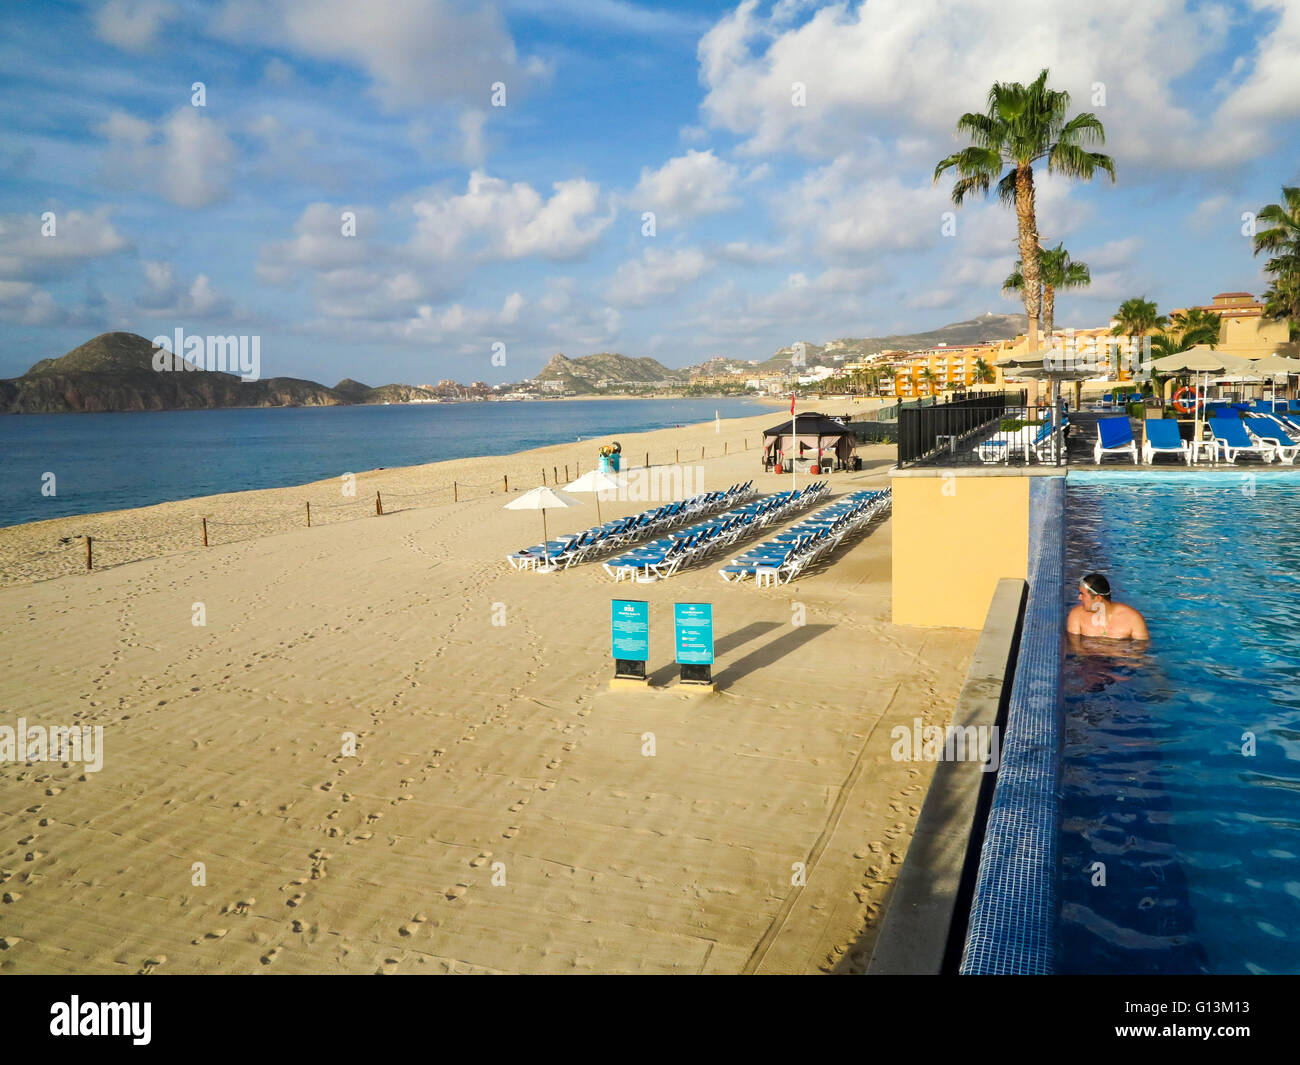 CABO SAN LUCAS, MEXICO - AUGUST 8, 2014: Unidentified people at RIU Santa Fe Hotel at Cabo San Lucas, Mexico. It is a 5 star hot Stock Photo